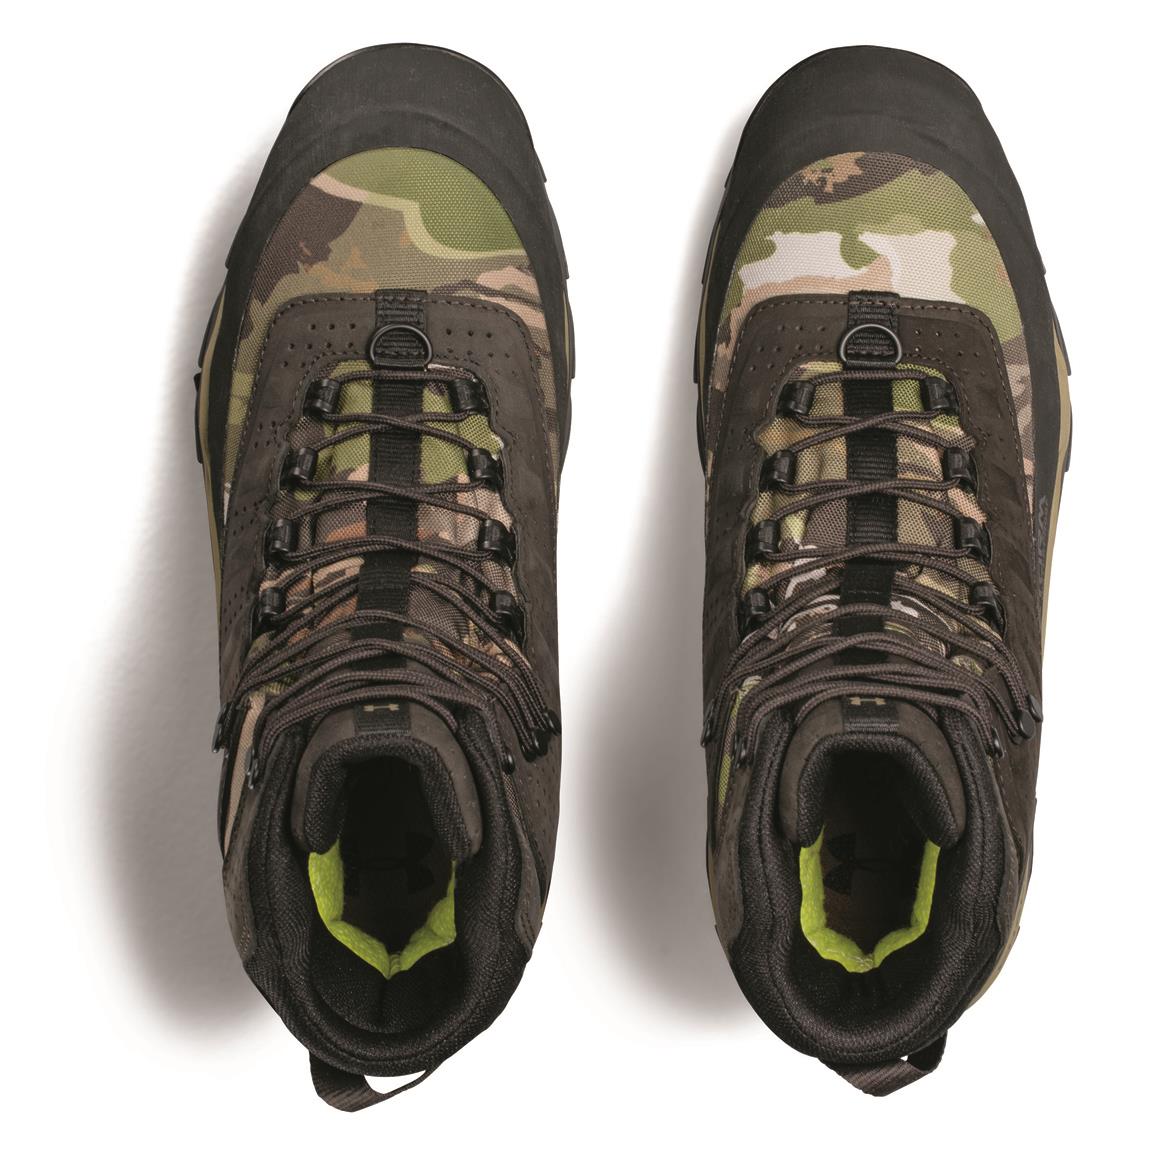 Waterproof Insulated Hunting Boots 